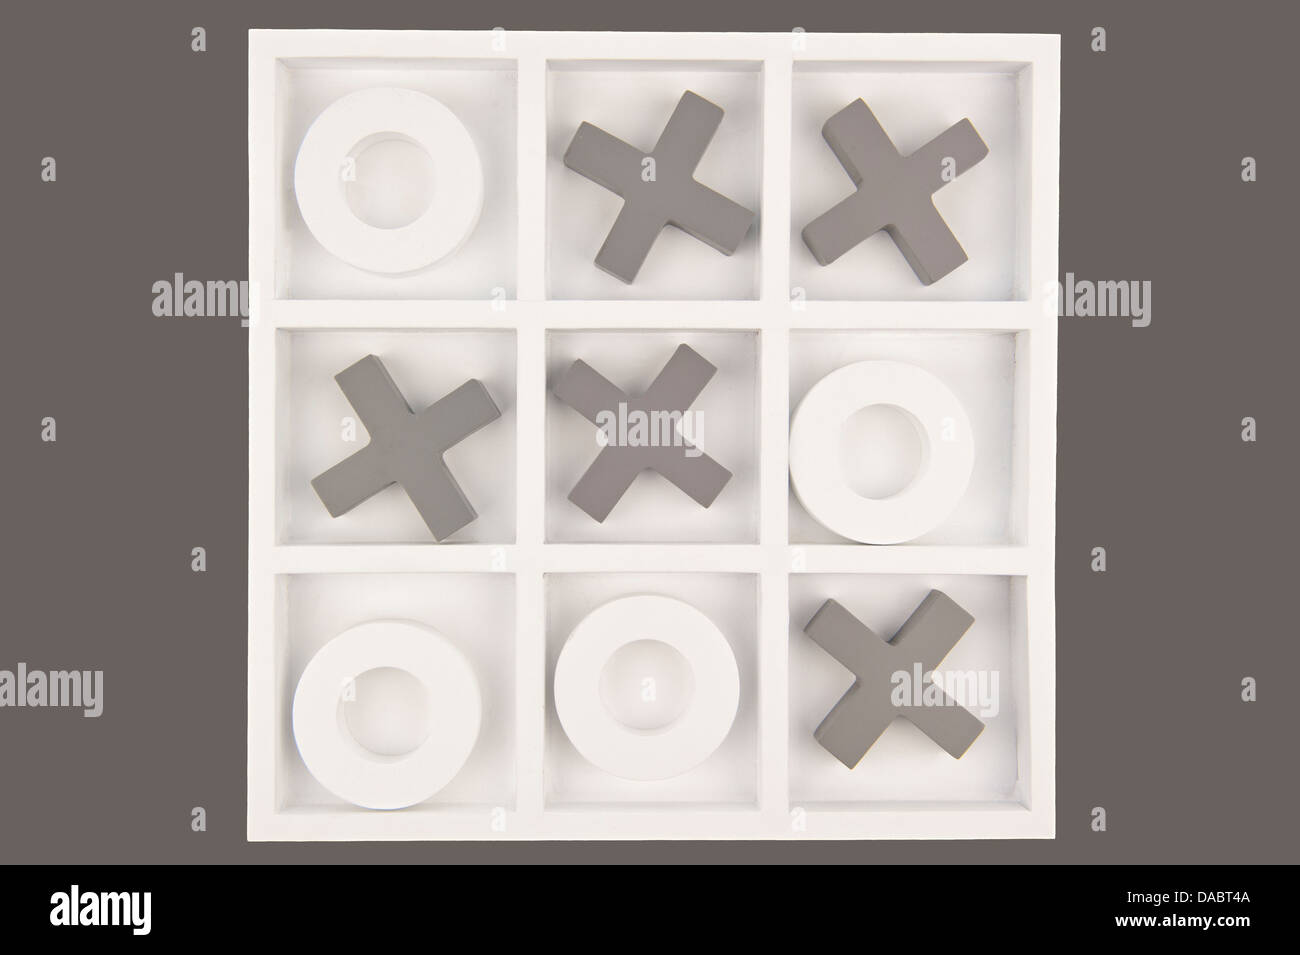 Wooden noughts and crosses game board in gray and white colors isolated in gray background Stock Photo